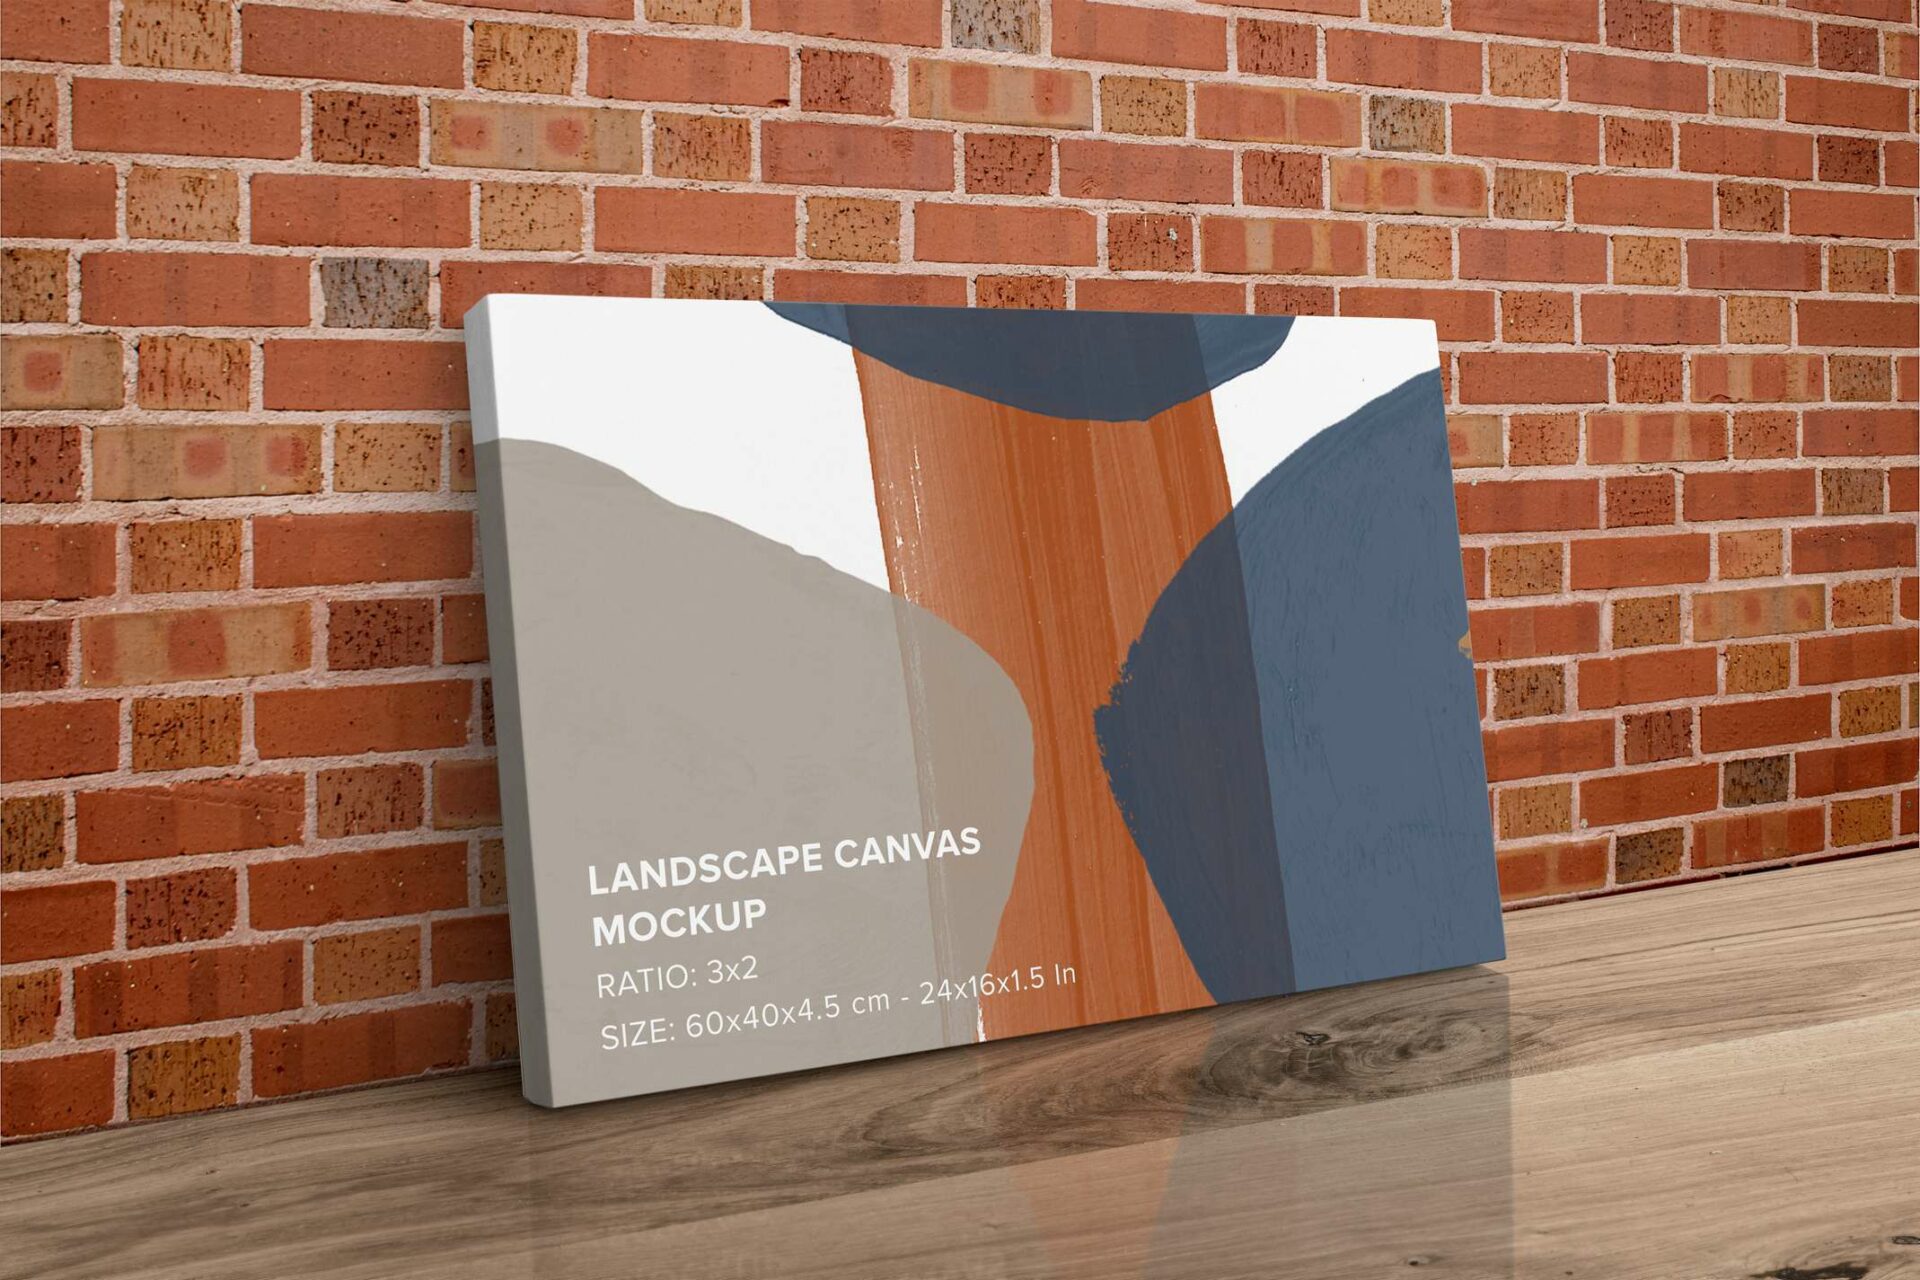 Leaning Landscape Canvas Ratio 3x2 Mockup - Left 1.5 In Wrap